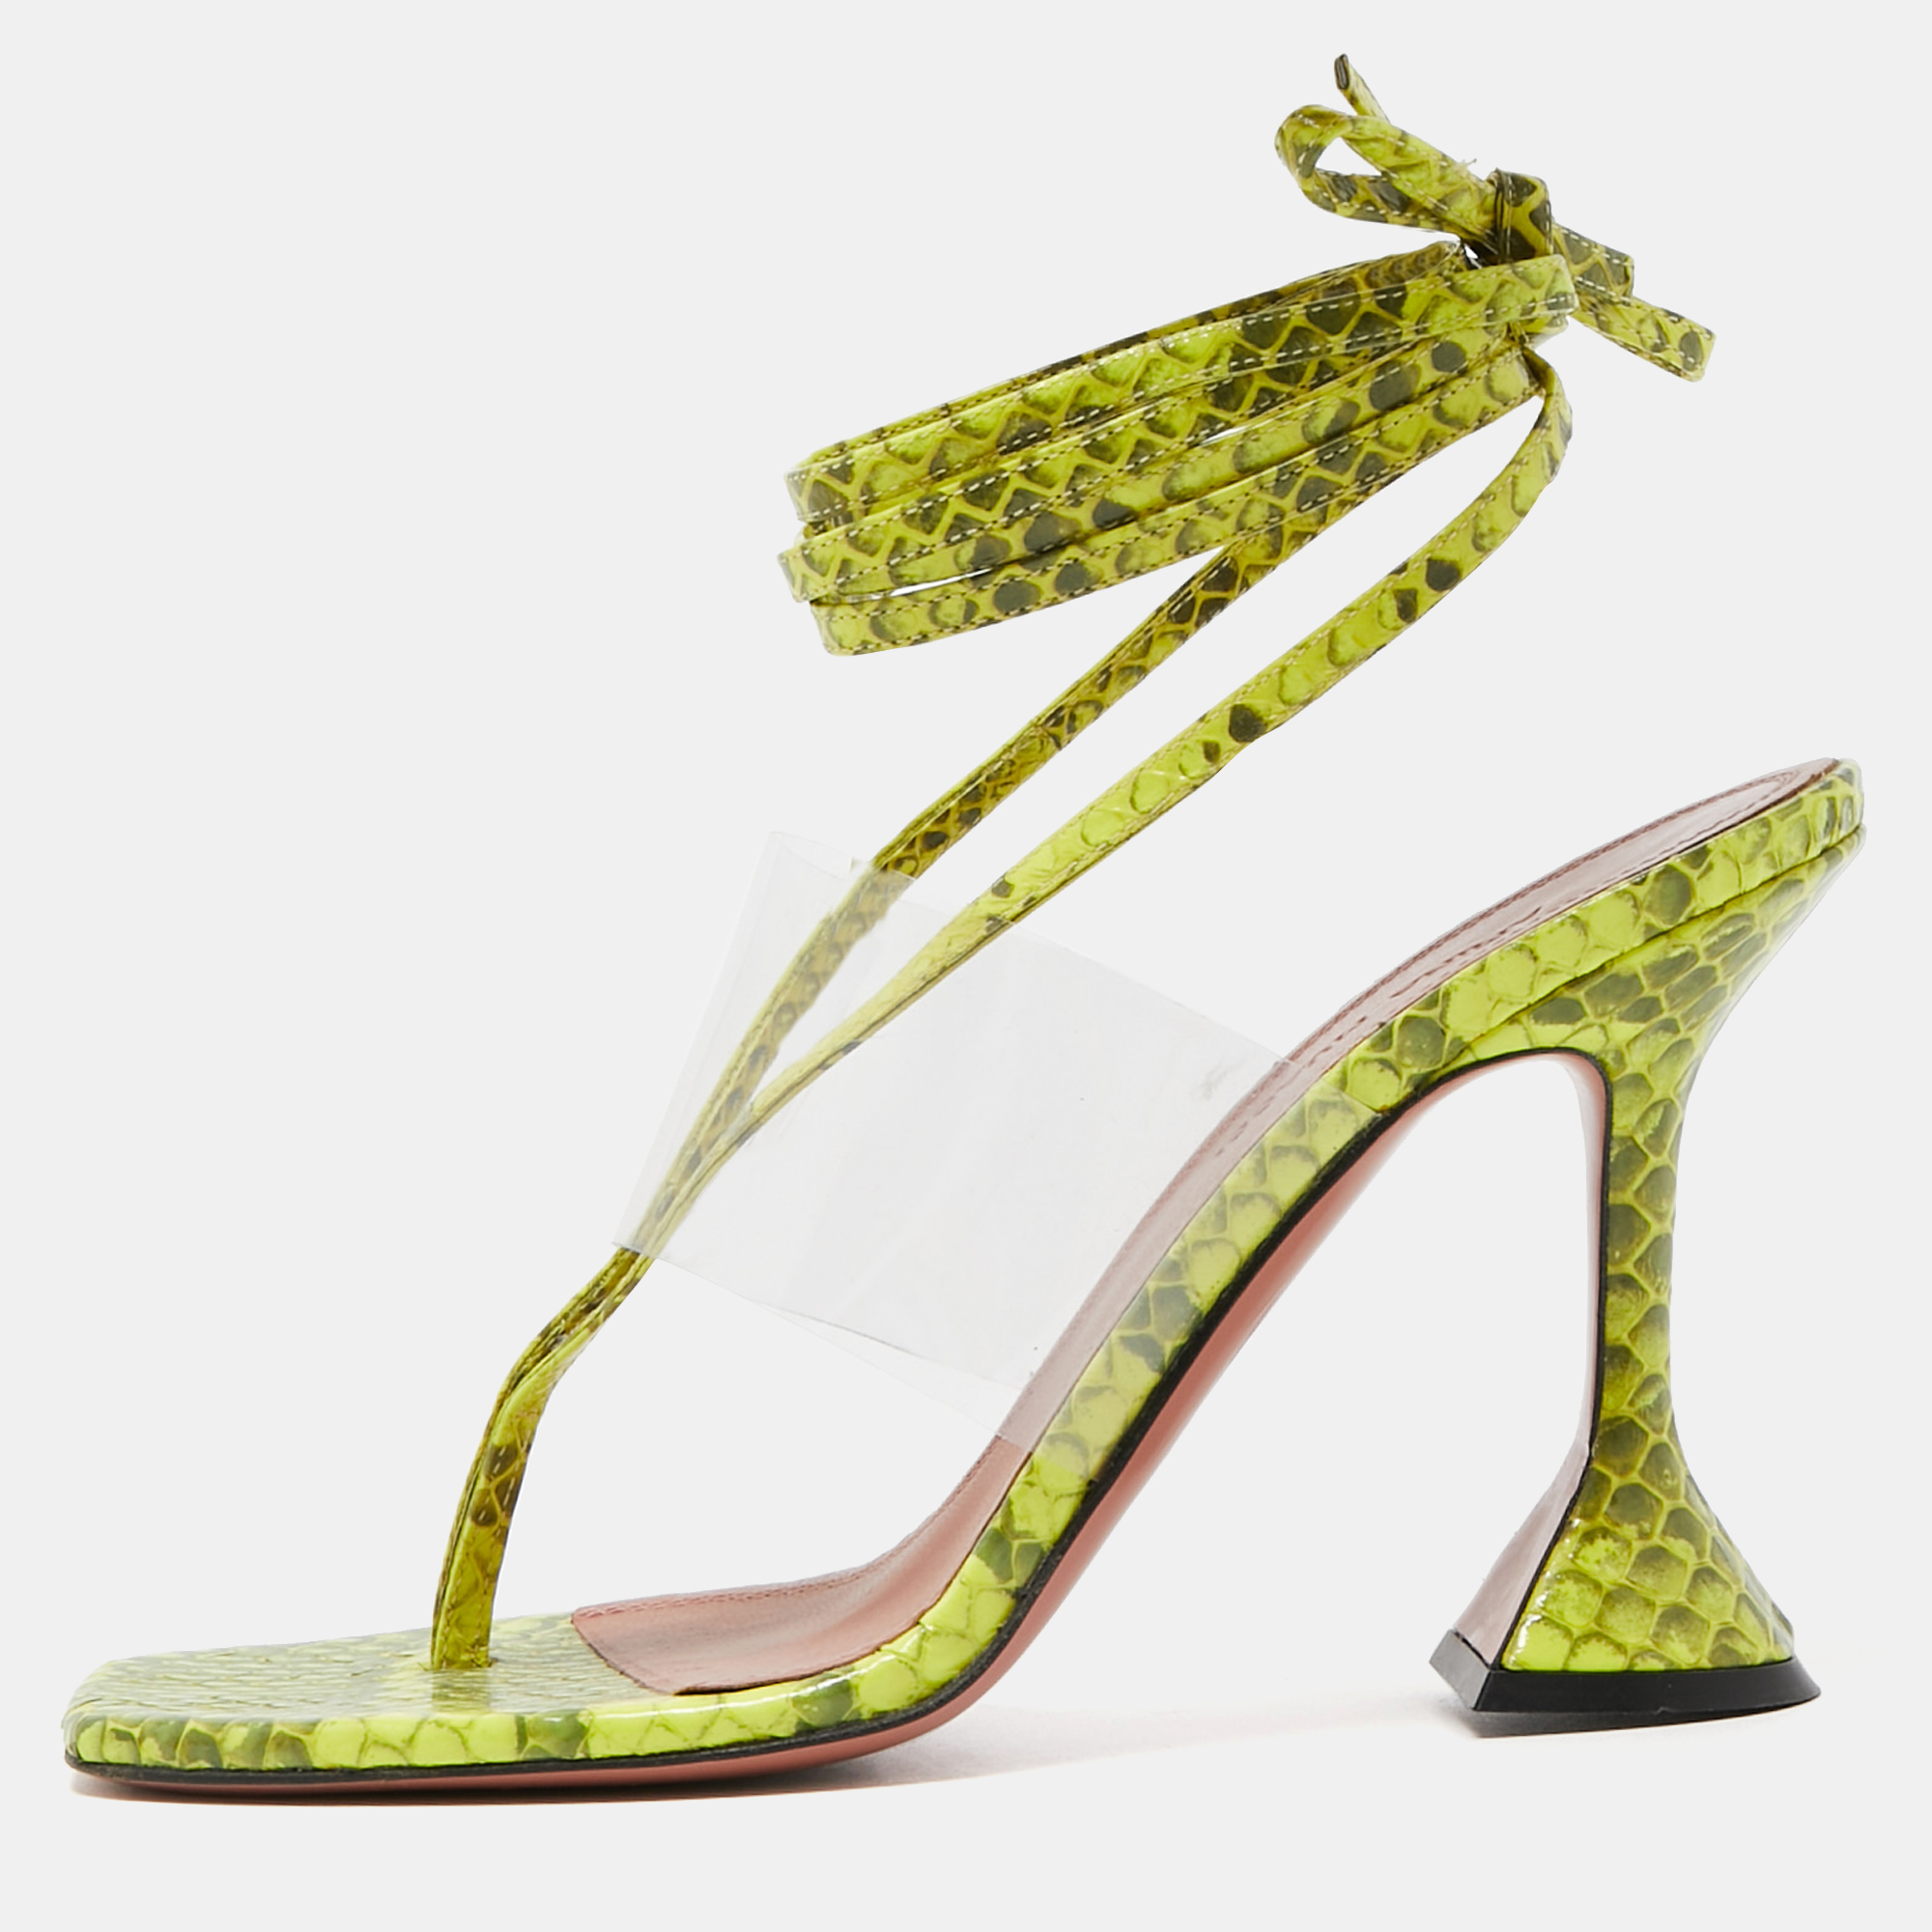 Amina Muaddi Two Tone Embossed Snakeskin And PVC Zula Ankle Tie Sandals Size 37